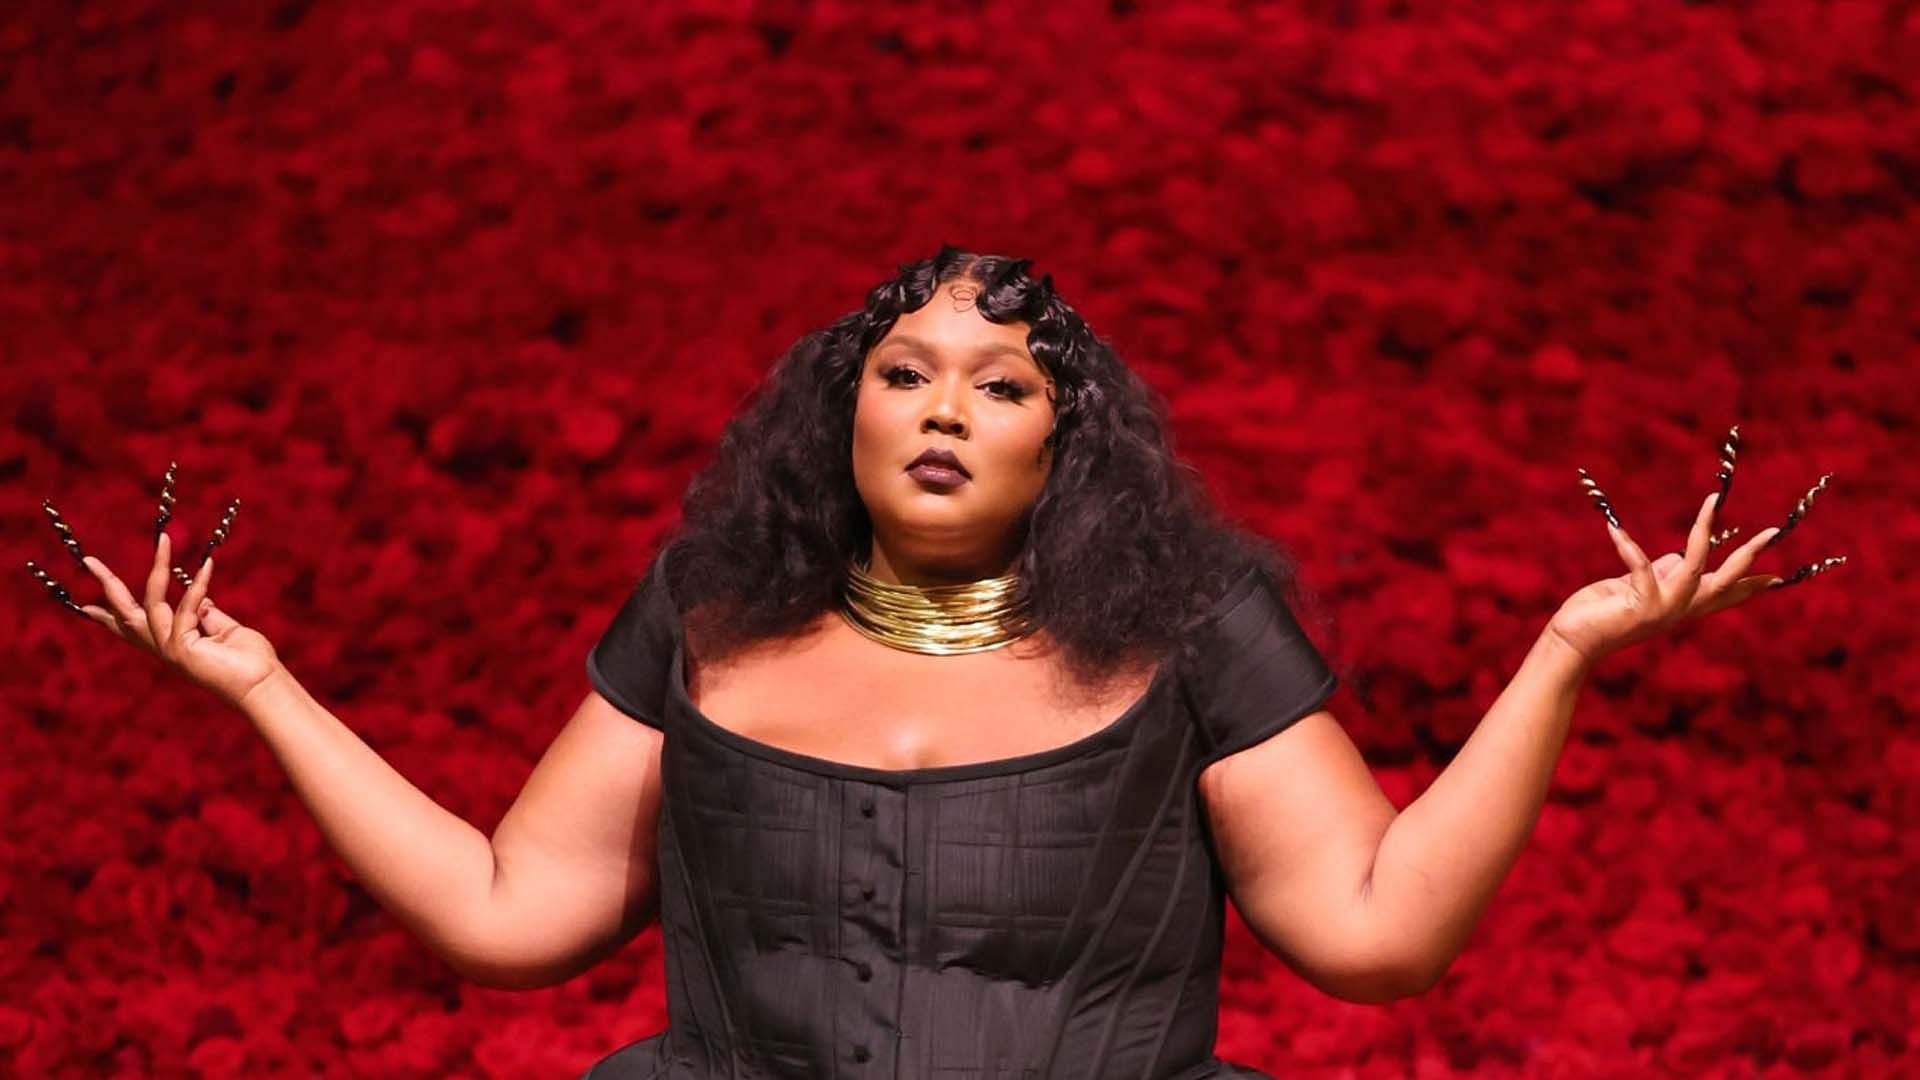 Biggest plot twist of 2023 keeps getting worse": Resurfaced interview of Lizzo talking about bananas goes viral amid lawsuit scandal